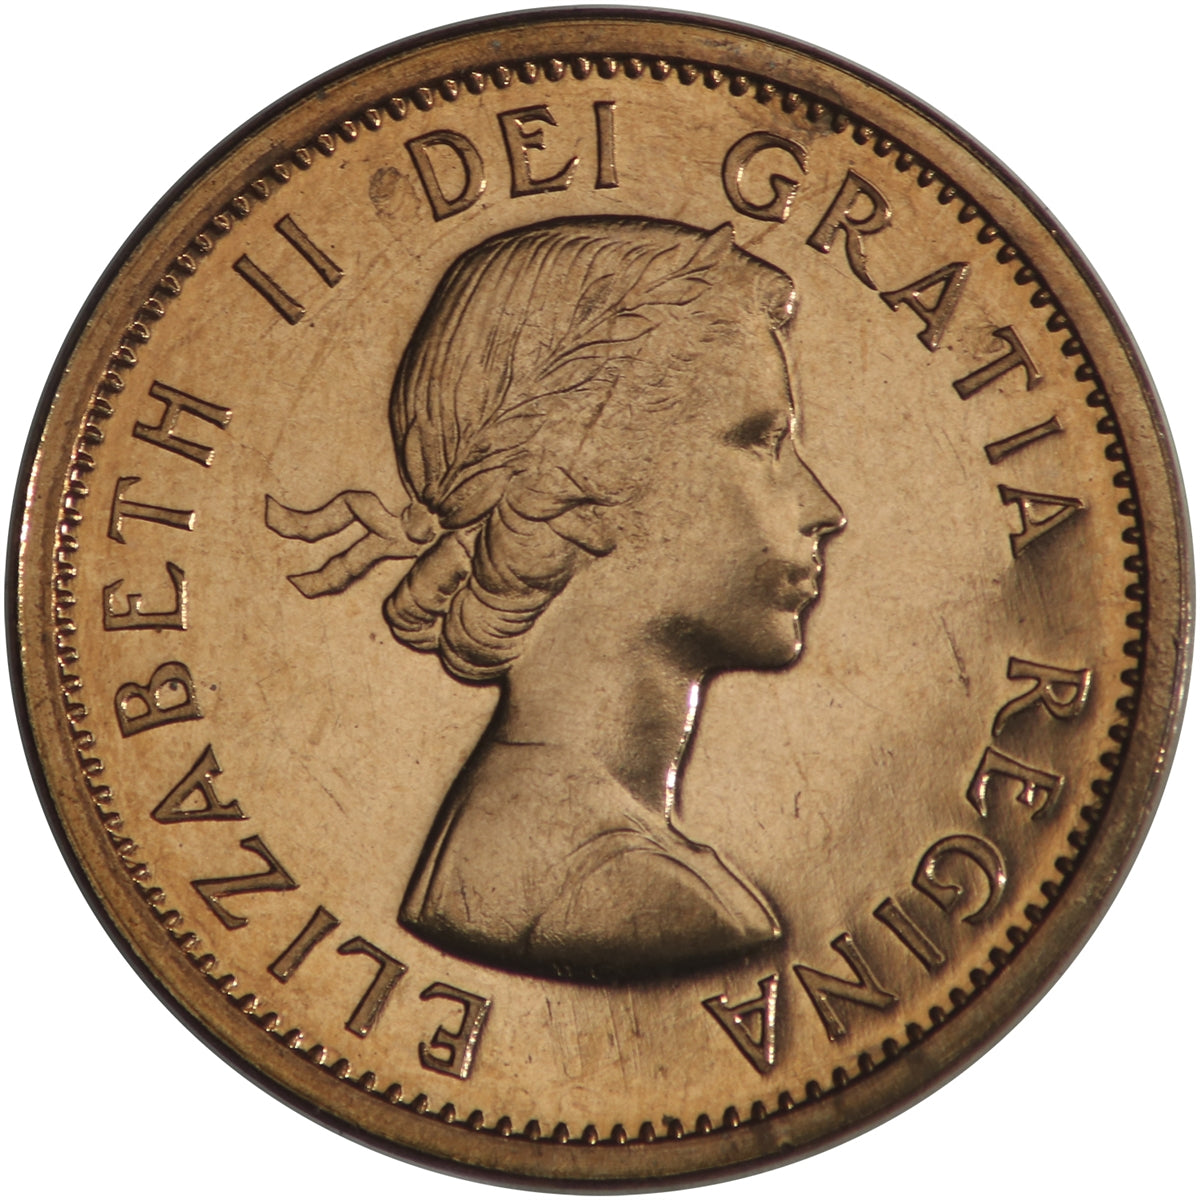 1963 Canada 1-cent Proof Like